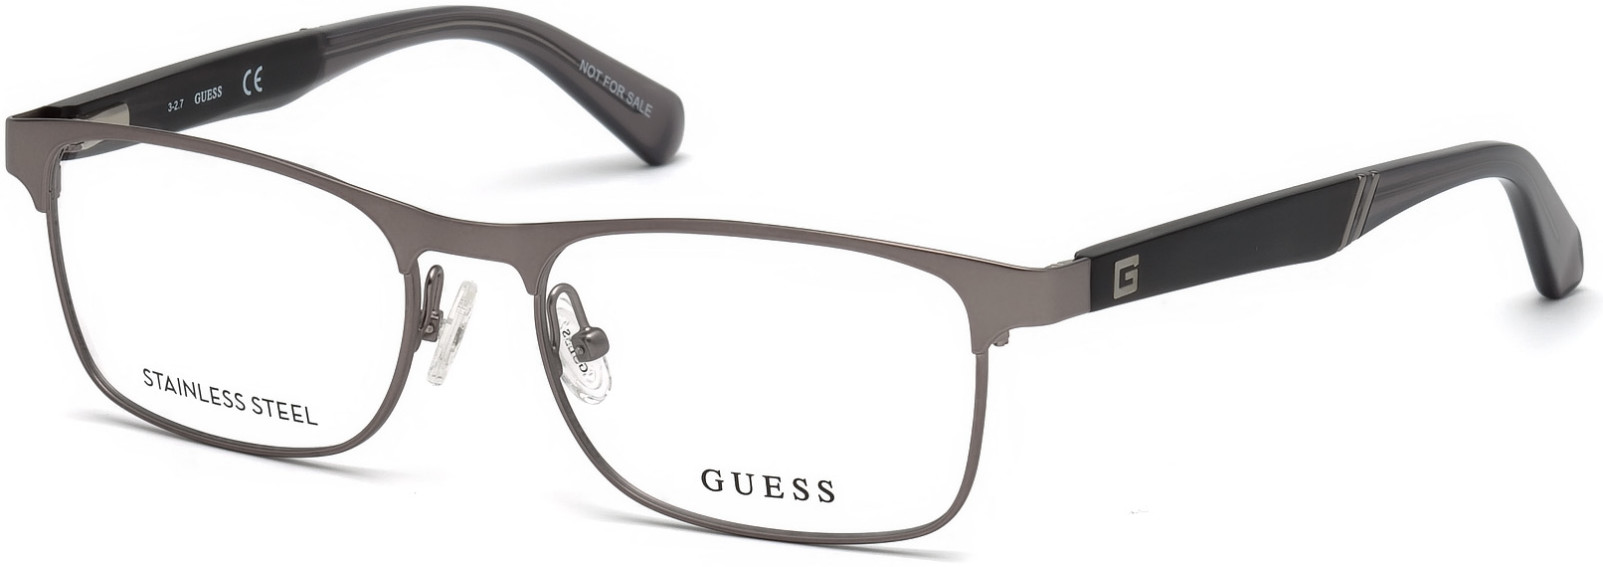 GUESS 1952 009